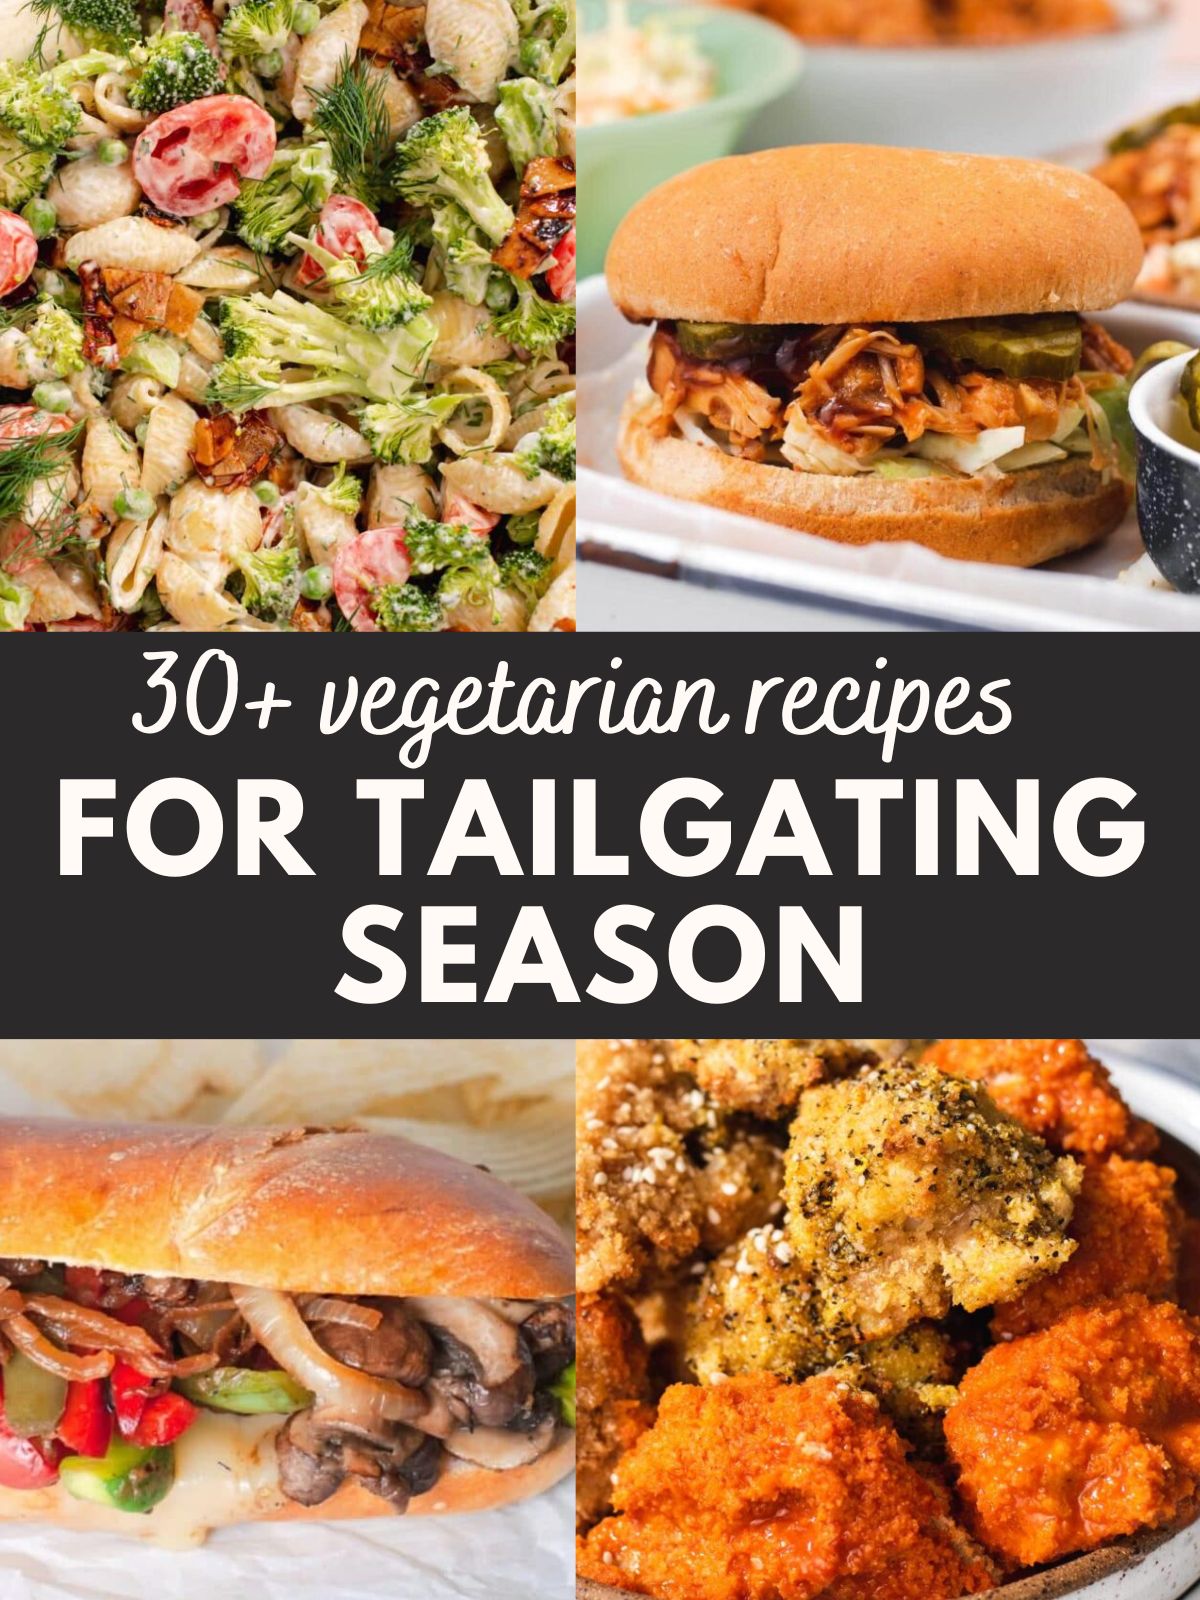 Graphic showing tailgating recipes.